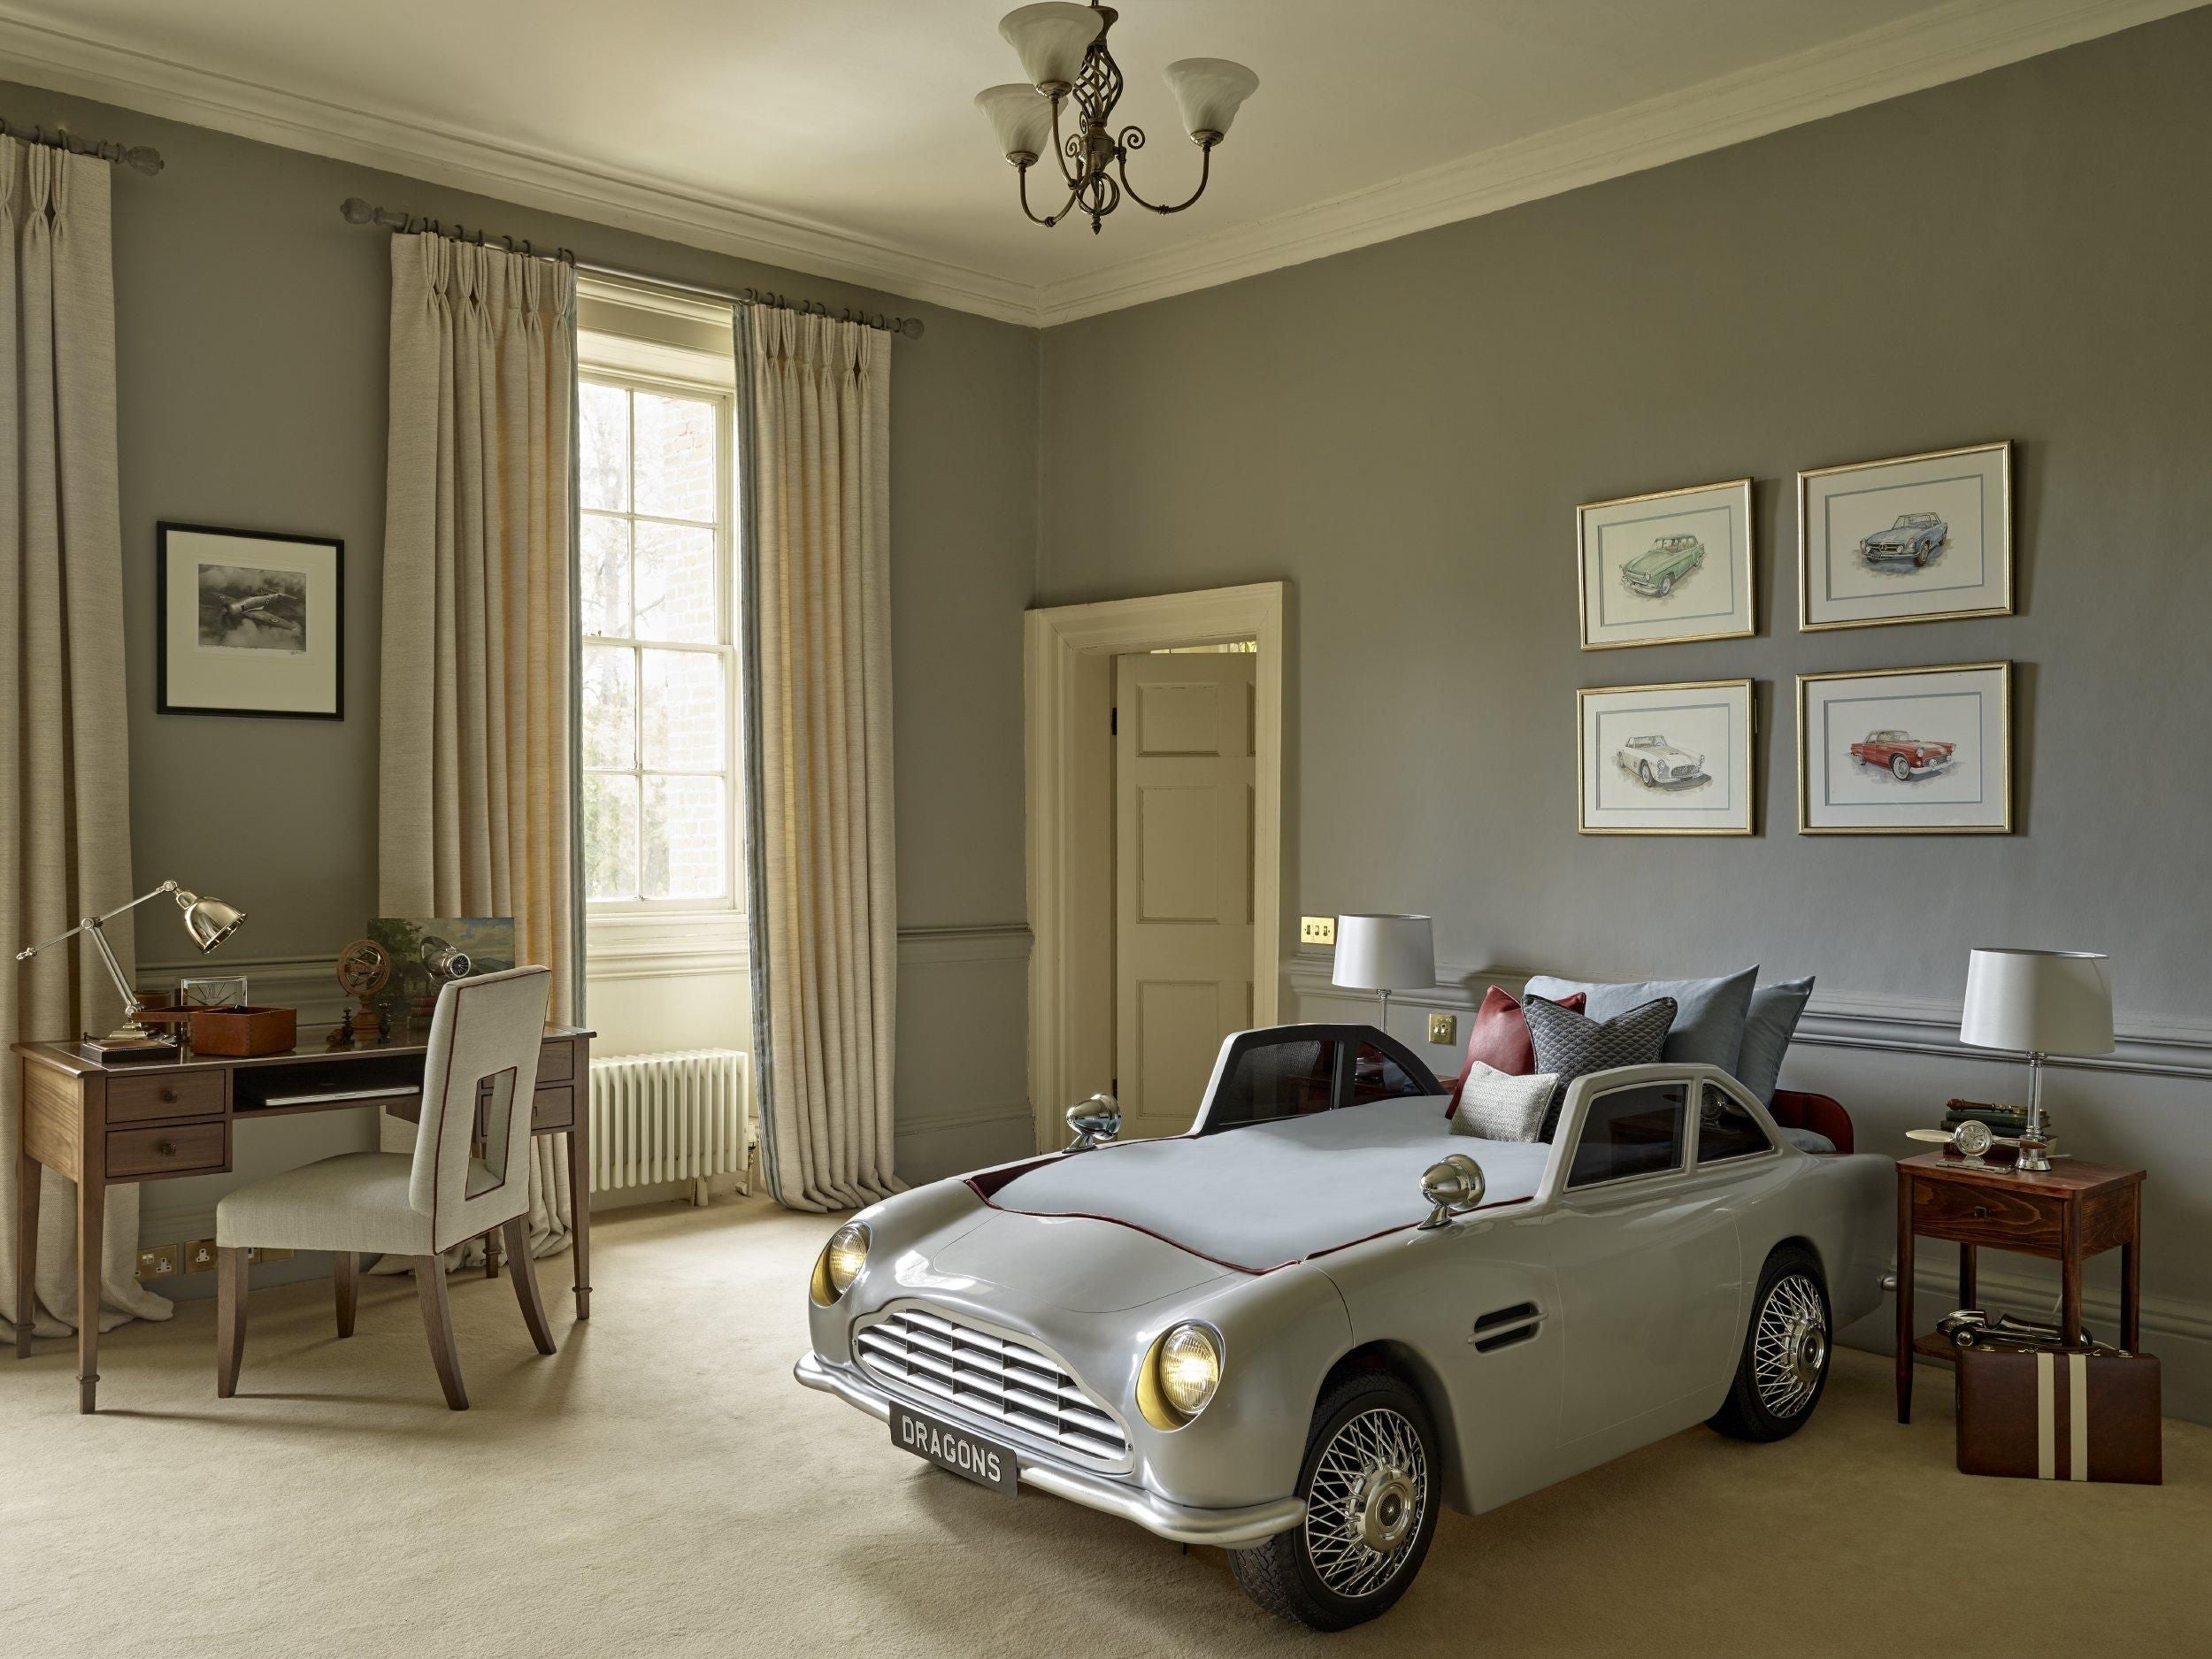 The Dragons VC150 - Vintage Car Bed